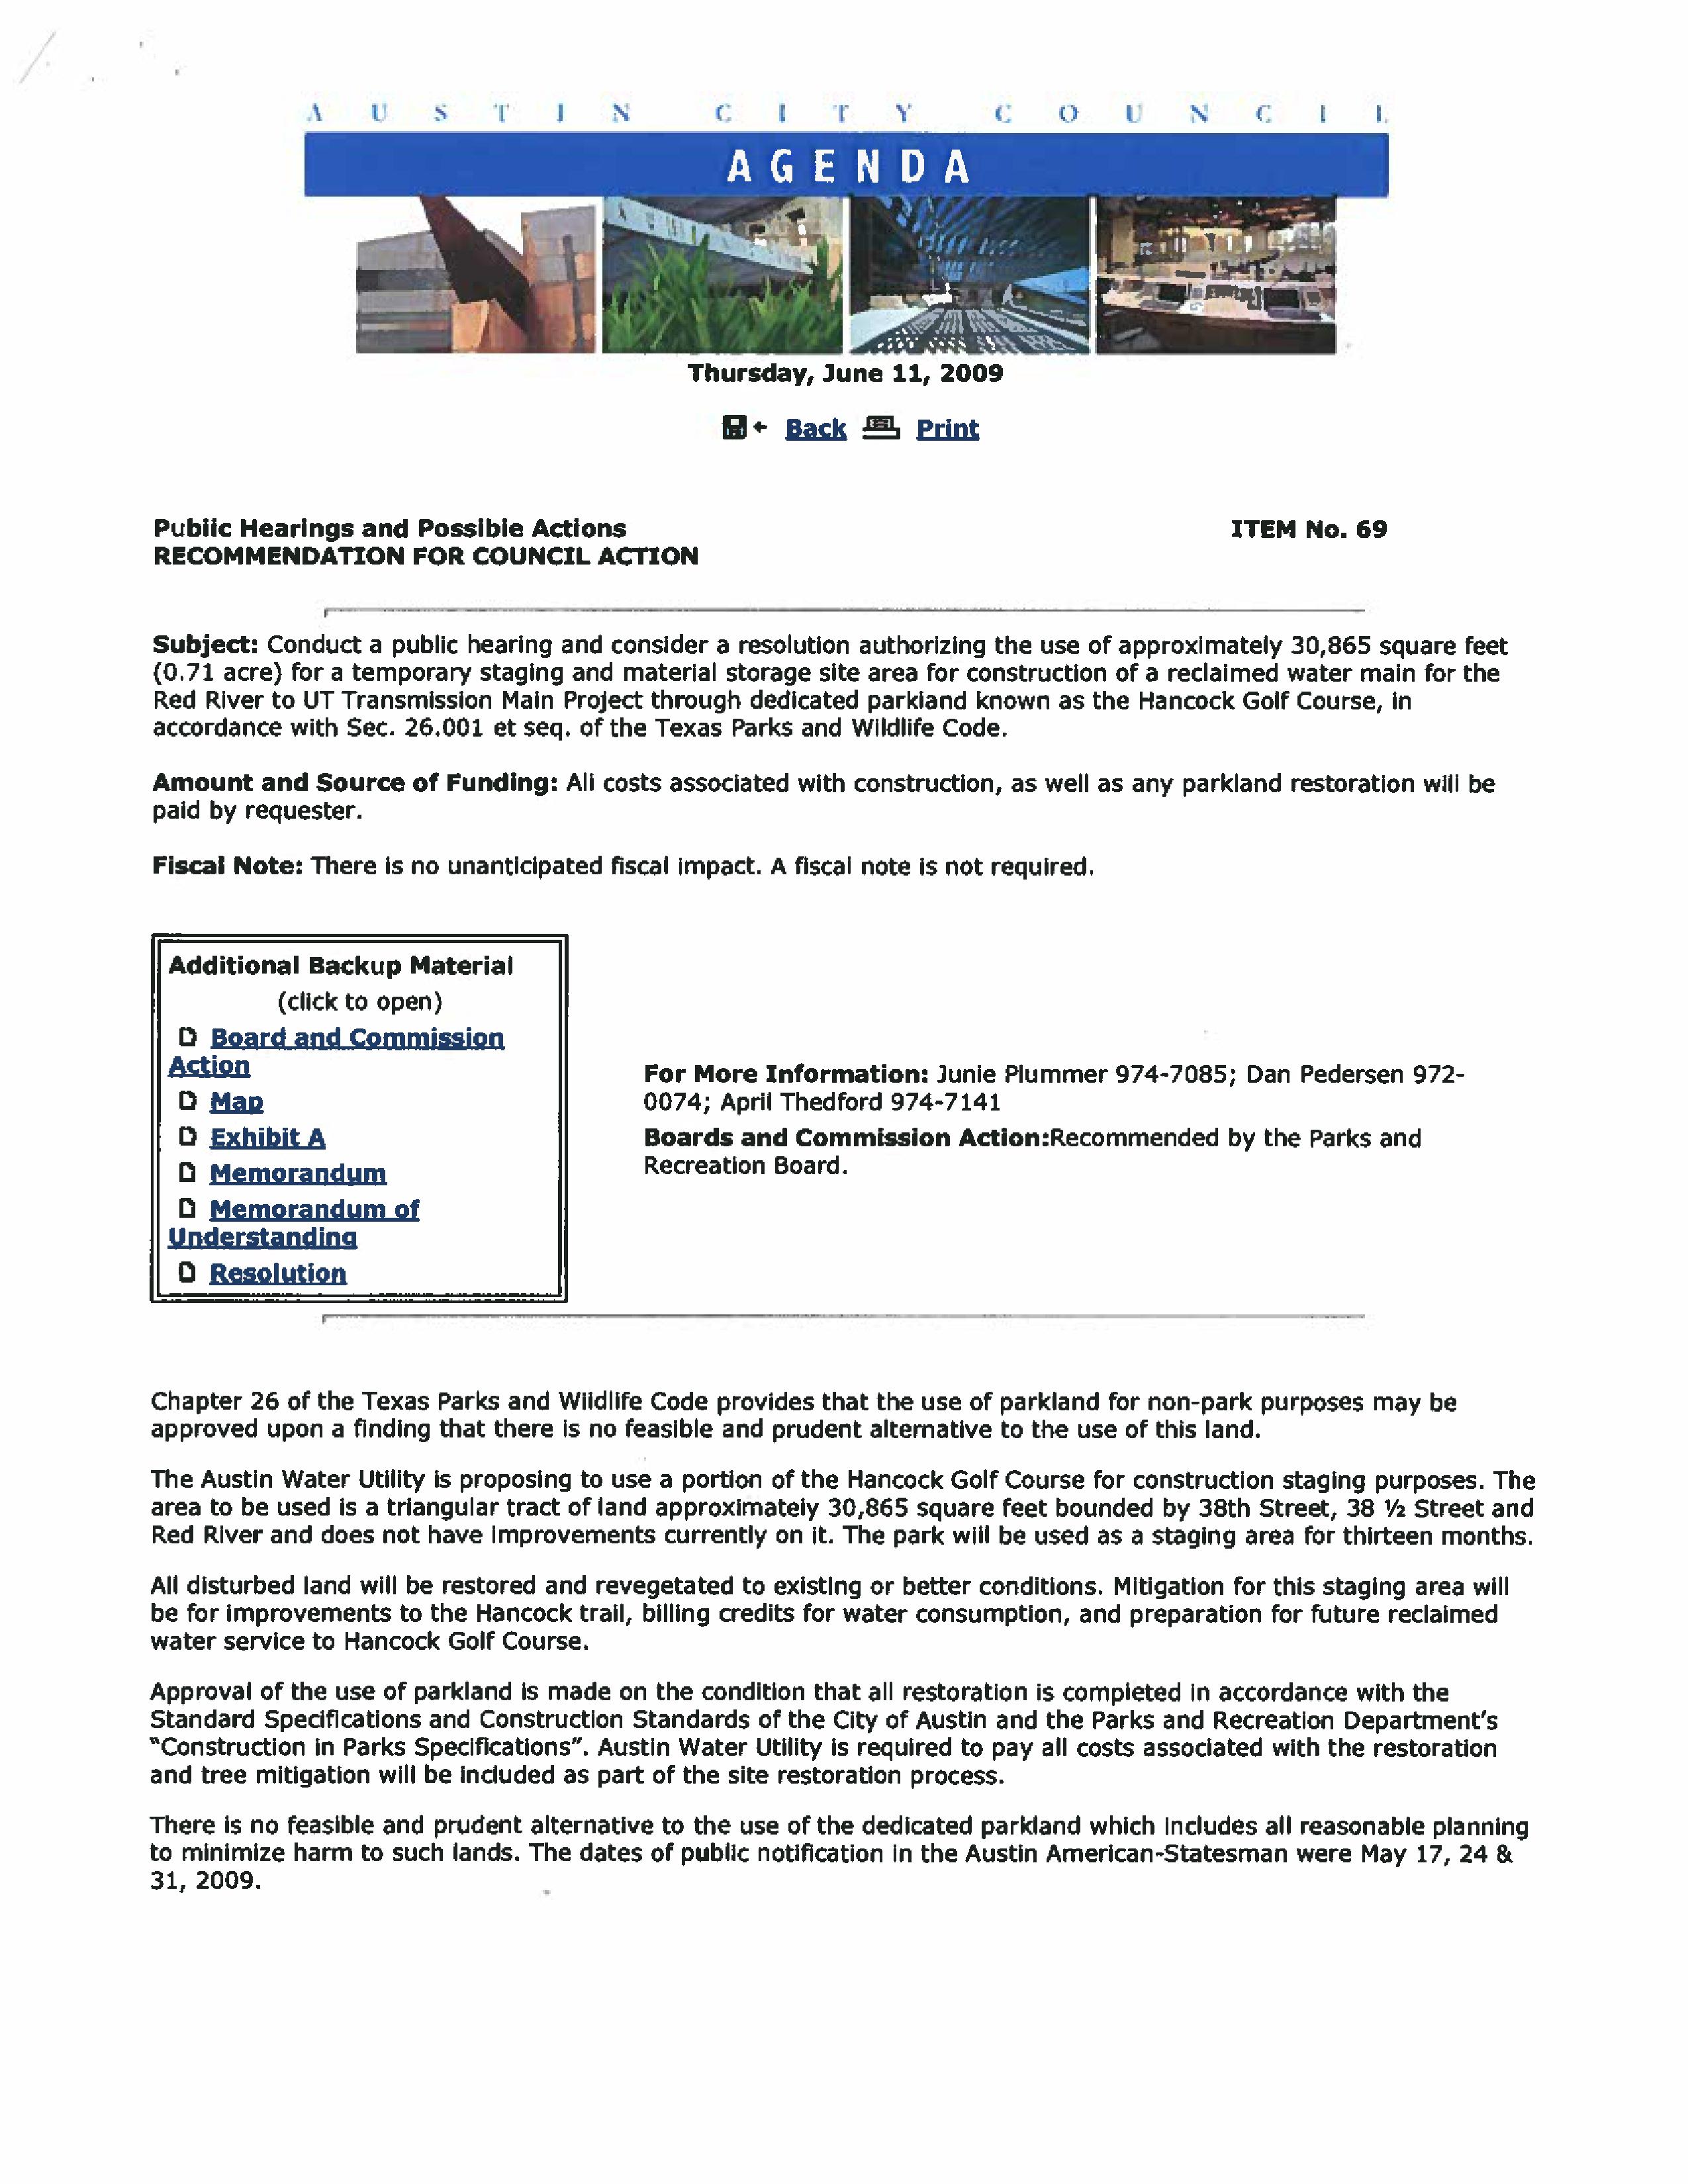 Memo - Reclaimed Water Line (attachment H)